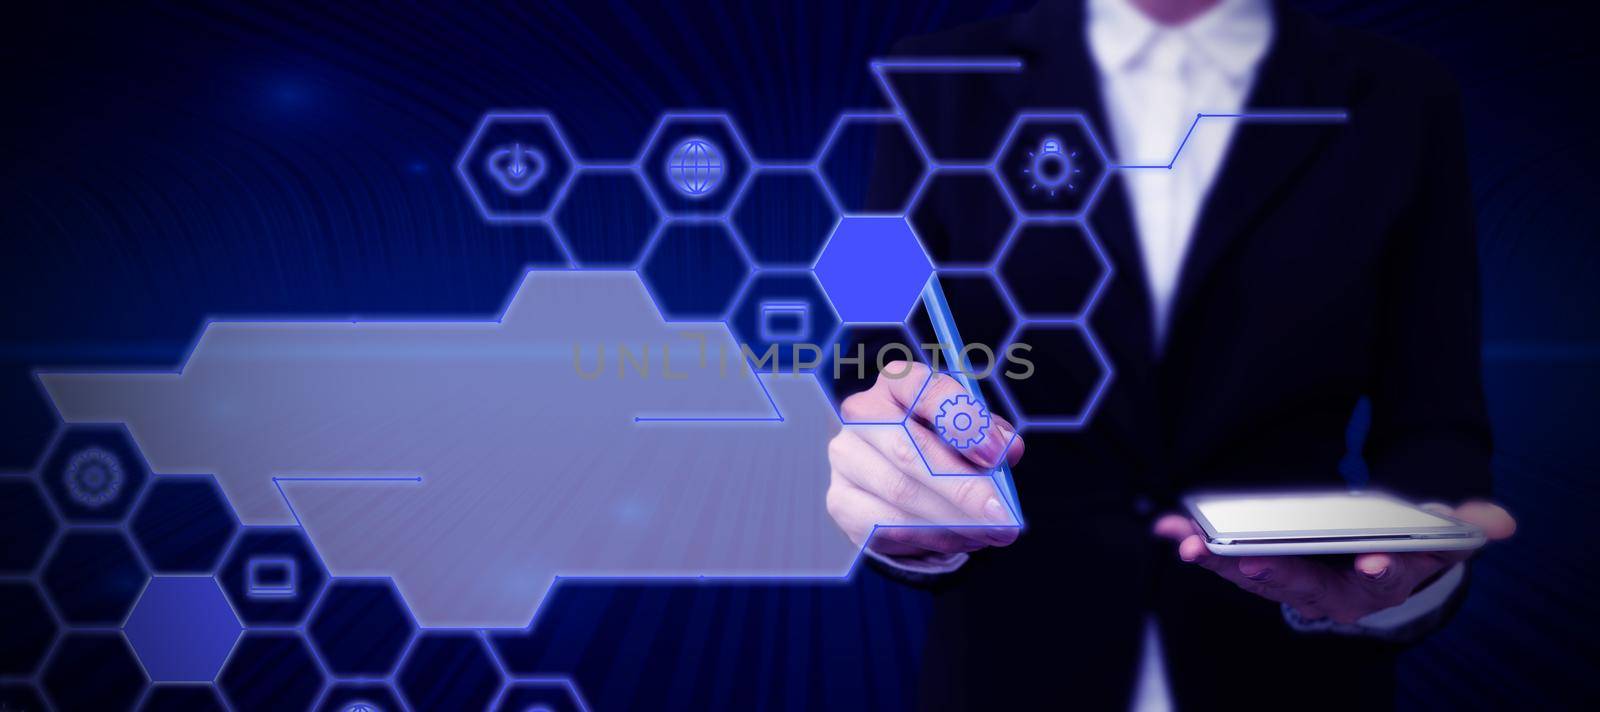 Businessman in suit holding open palm symbolizing successful teamwork accomplishing newest project plans. Man reaching hand out representing combined effort management. by nialowwa